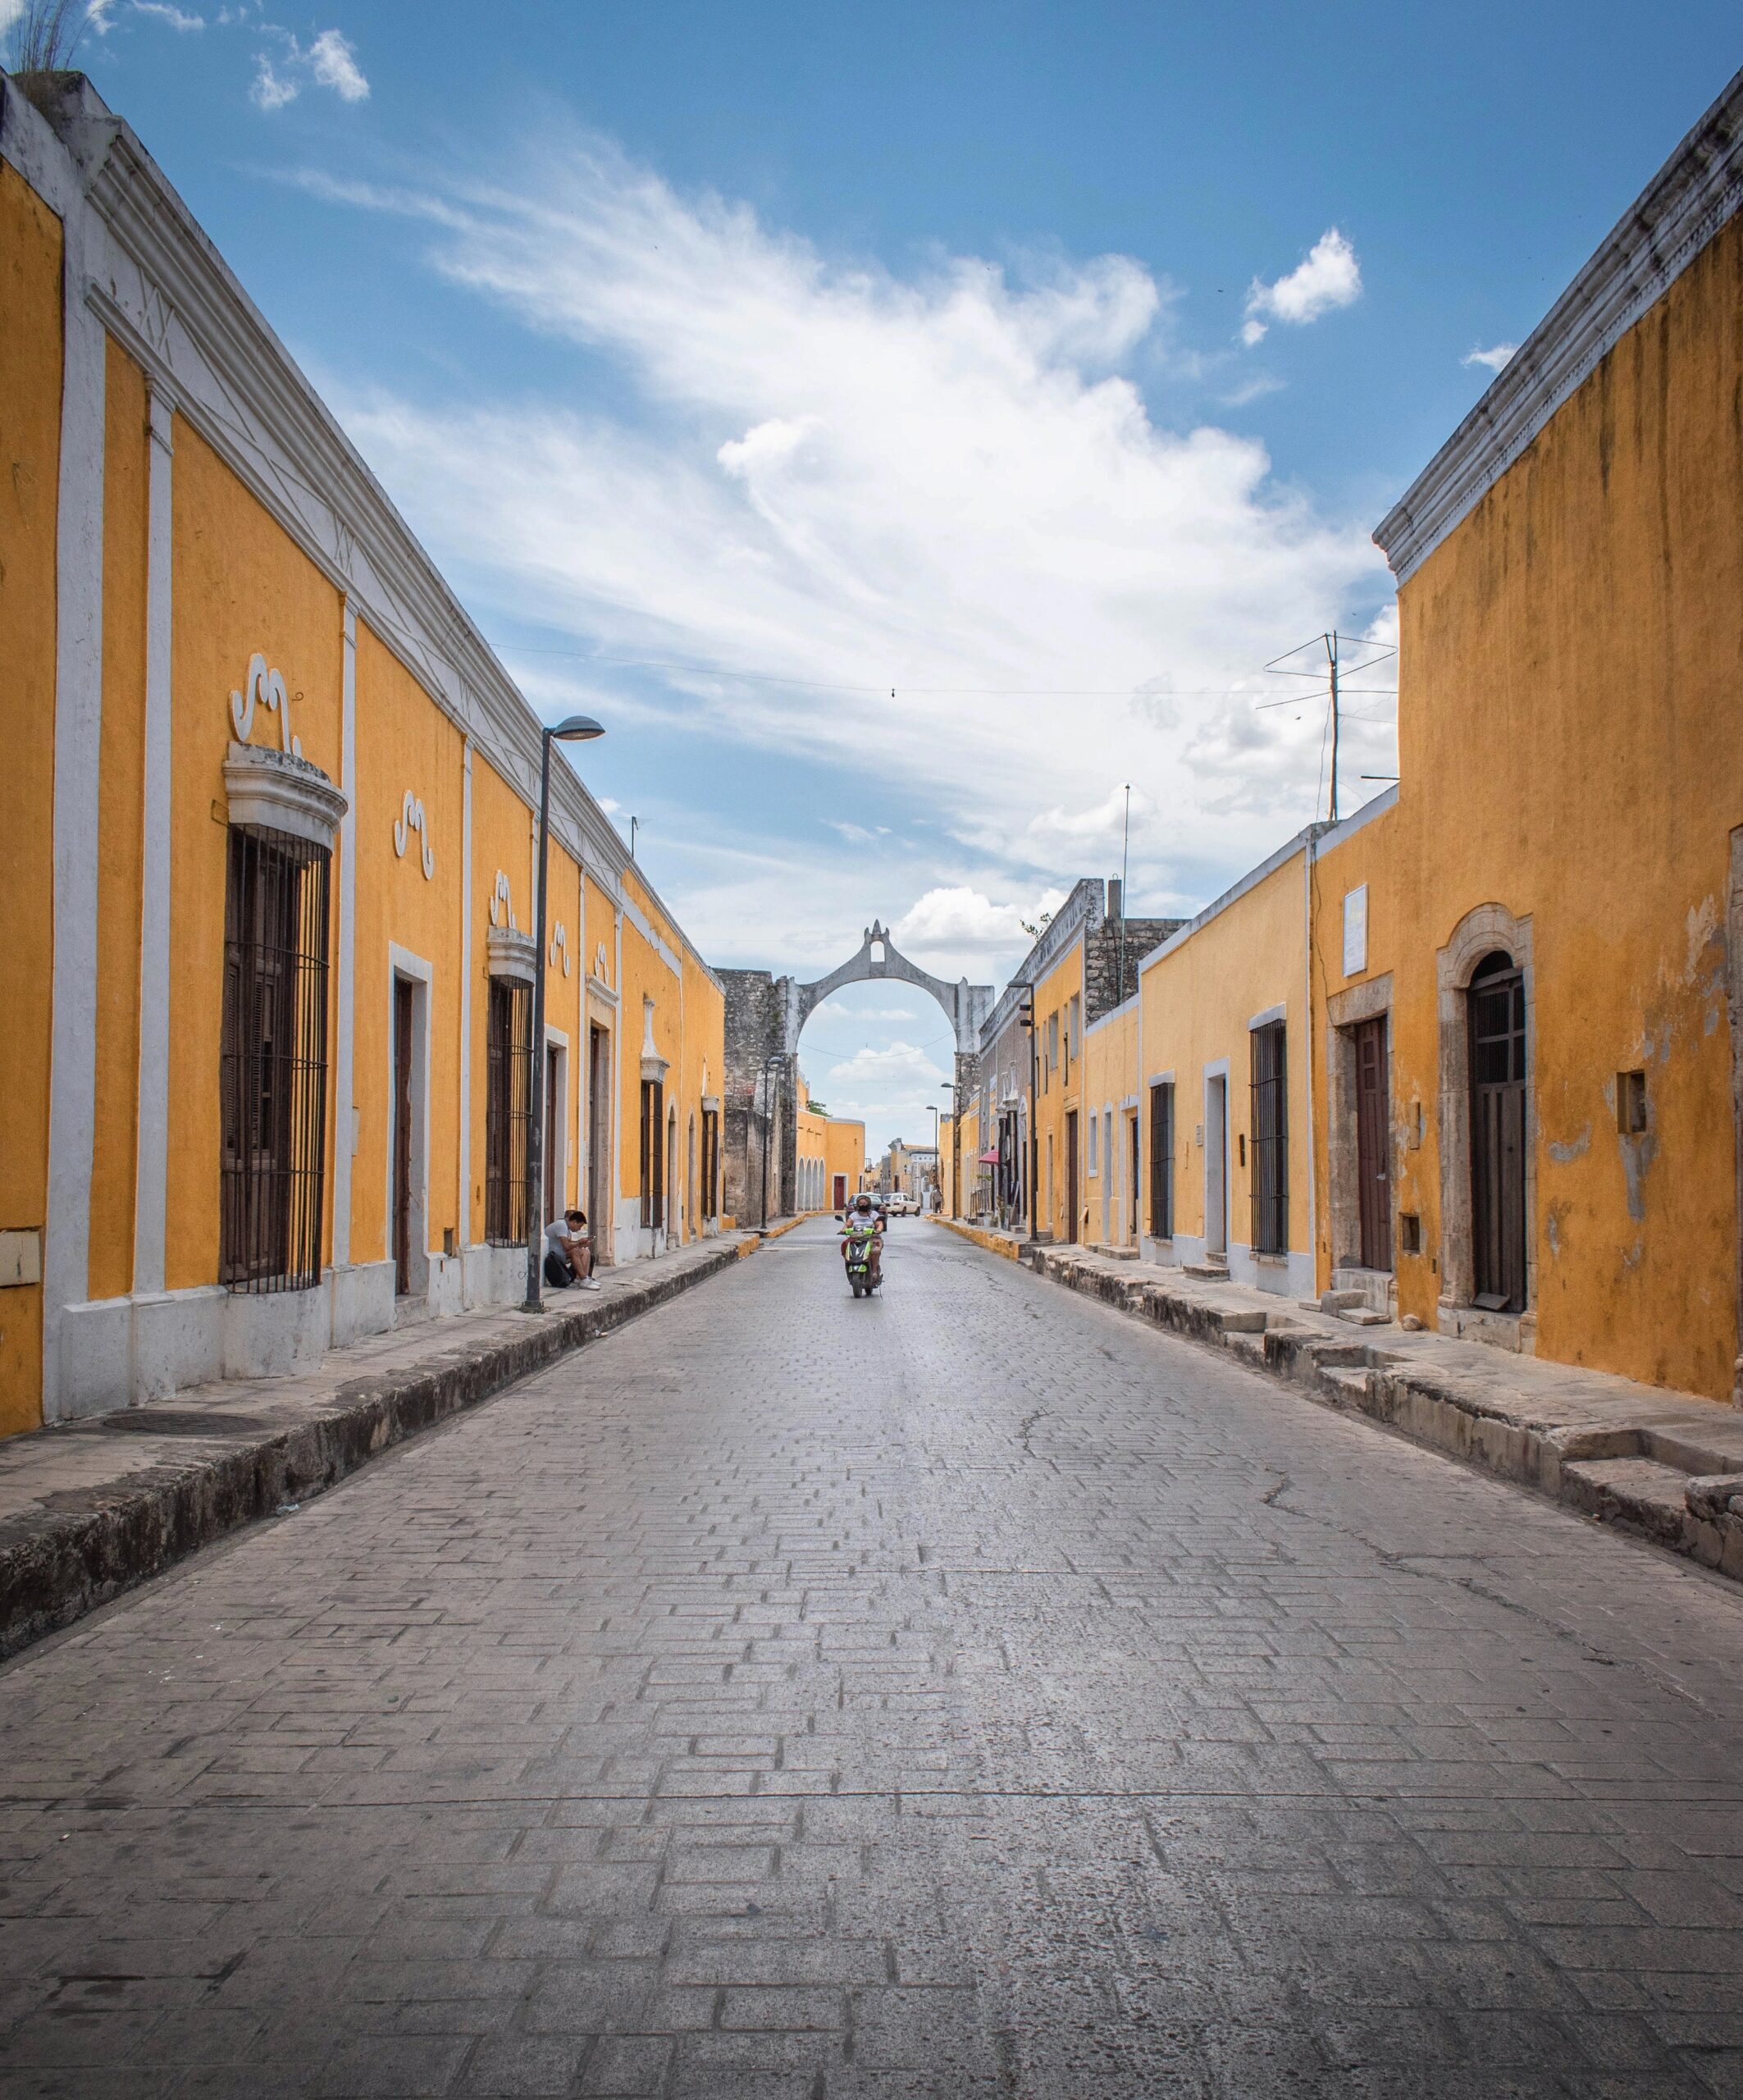 A street of izamal with yellow buildings on sides and a woman on a scooter in the center